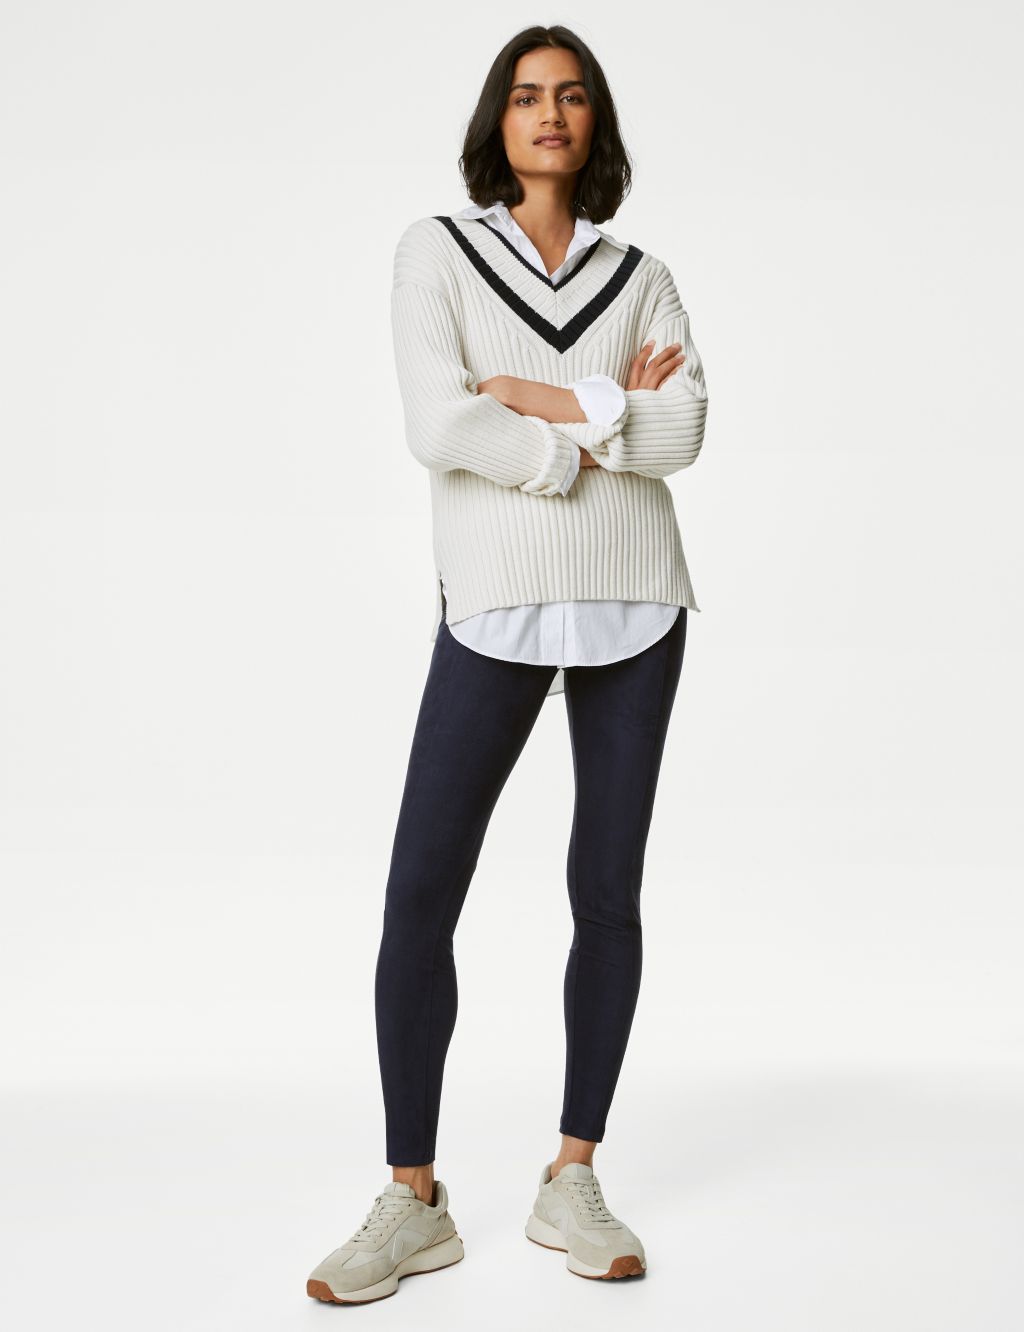 Suedette High Waisted Leggings image 1